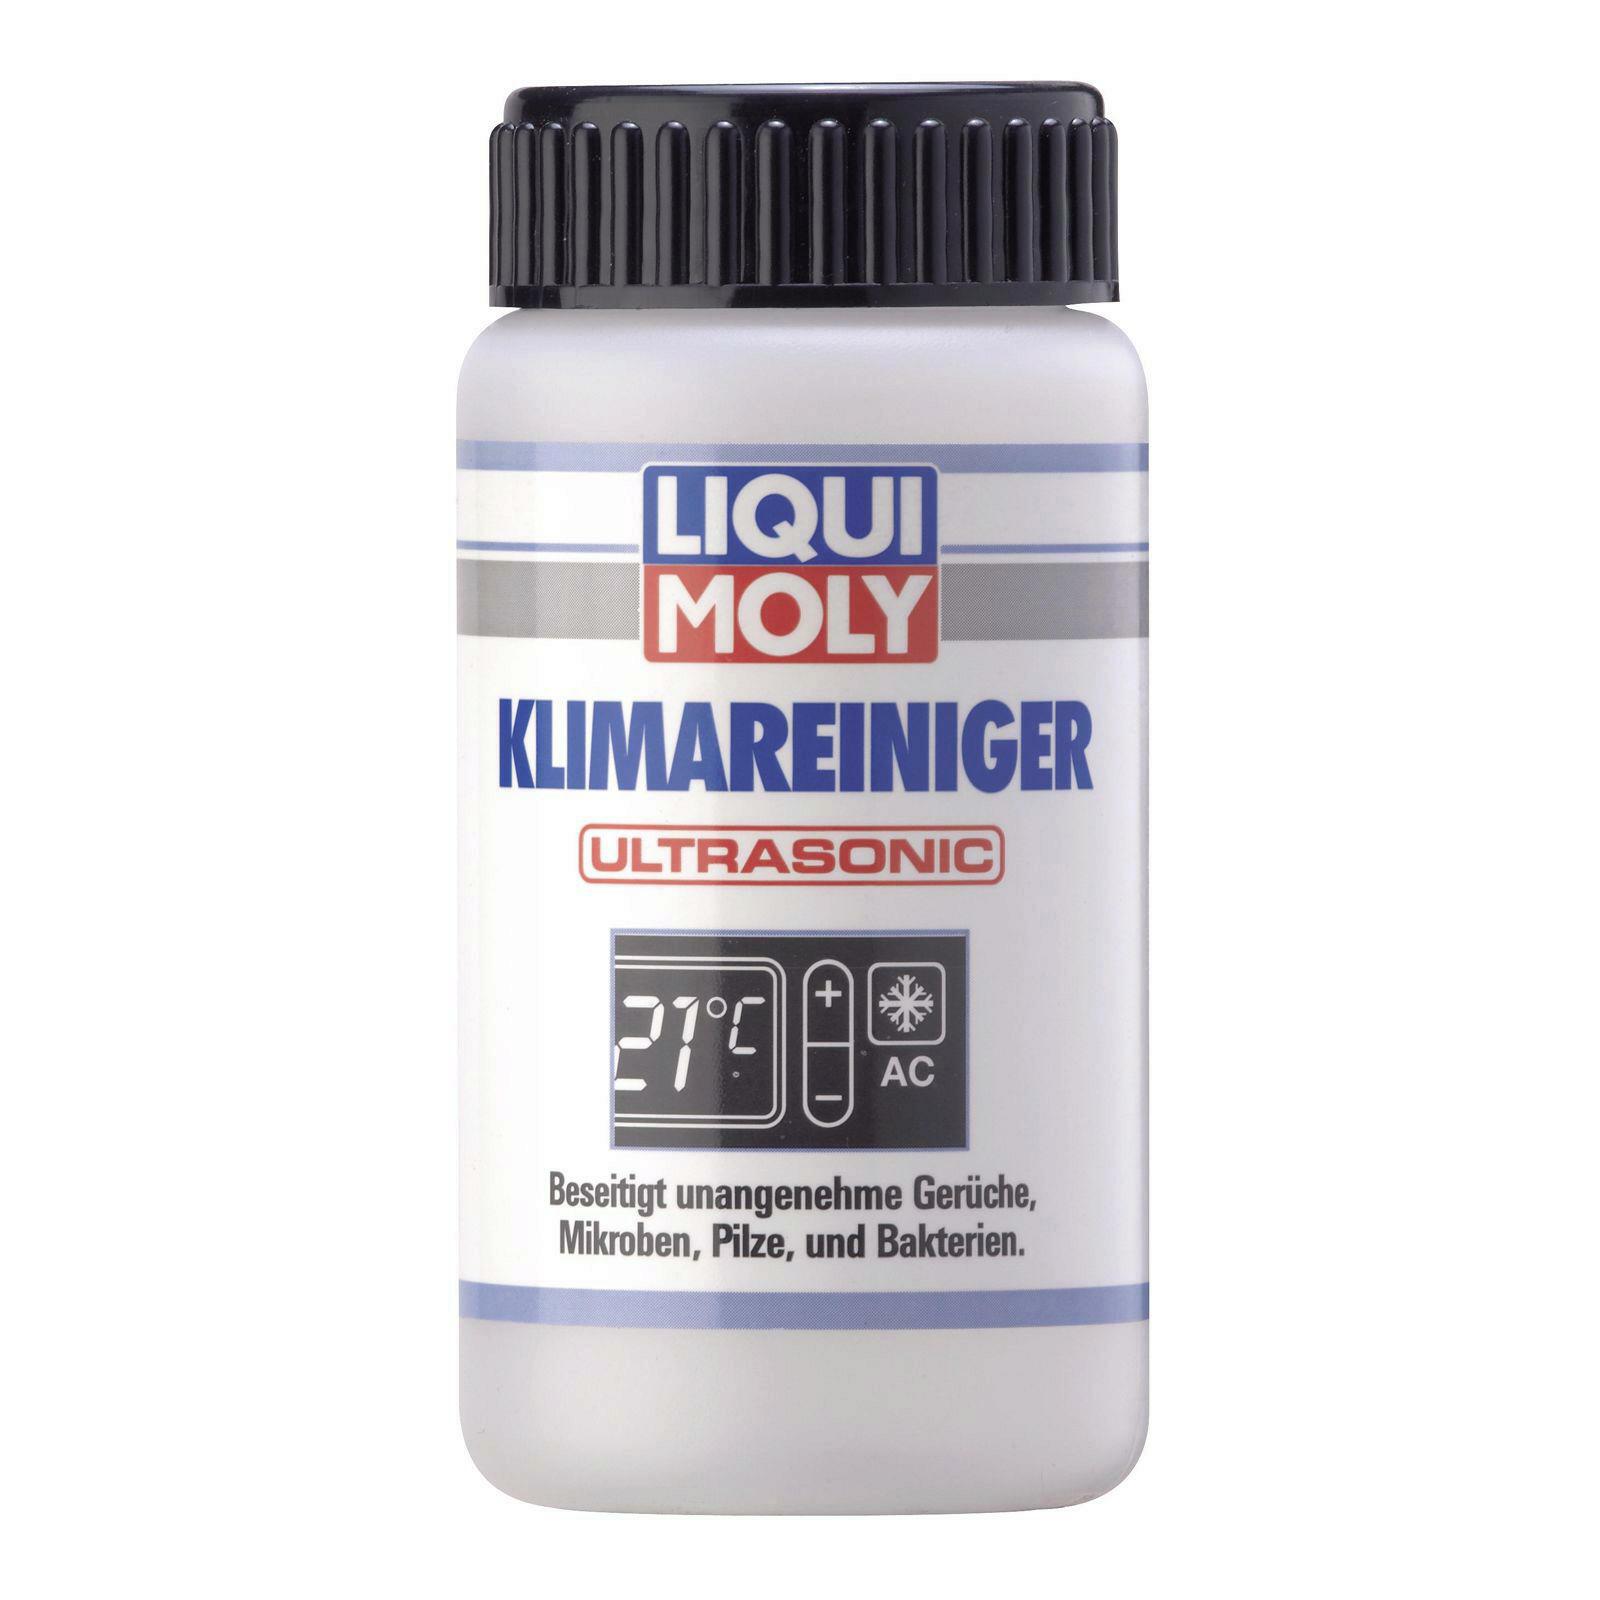 LIQUI MOLY Air Conditioning Cleaner/-Disinfecter Klimareiniger ULTRASONIC